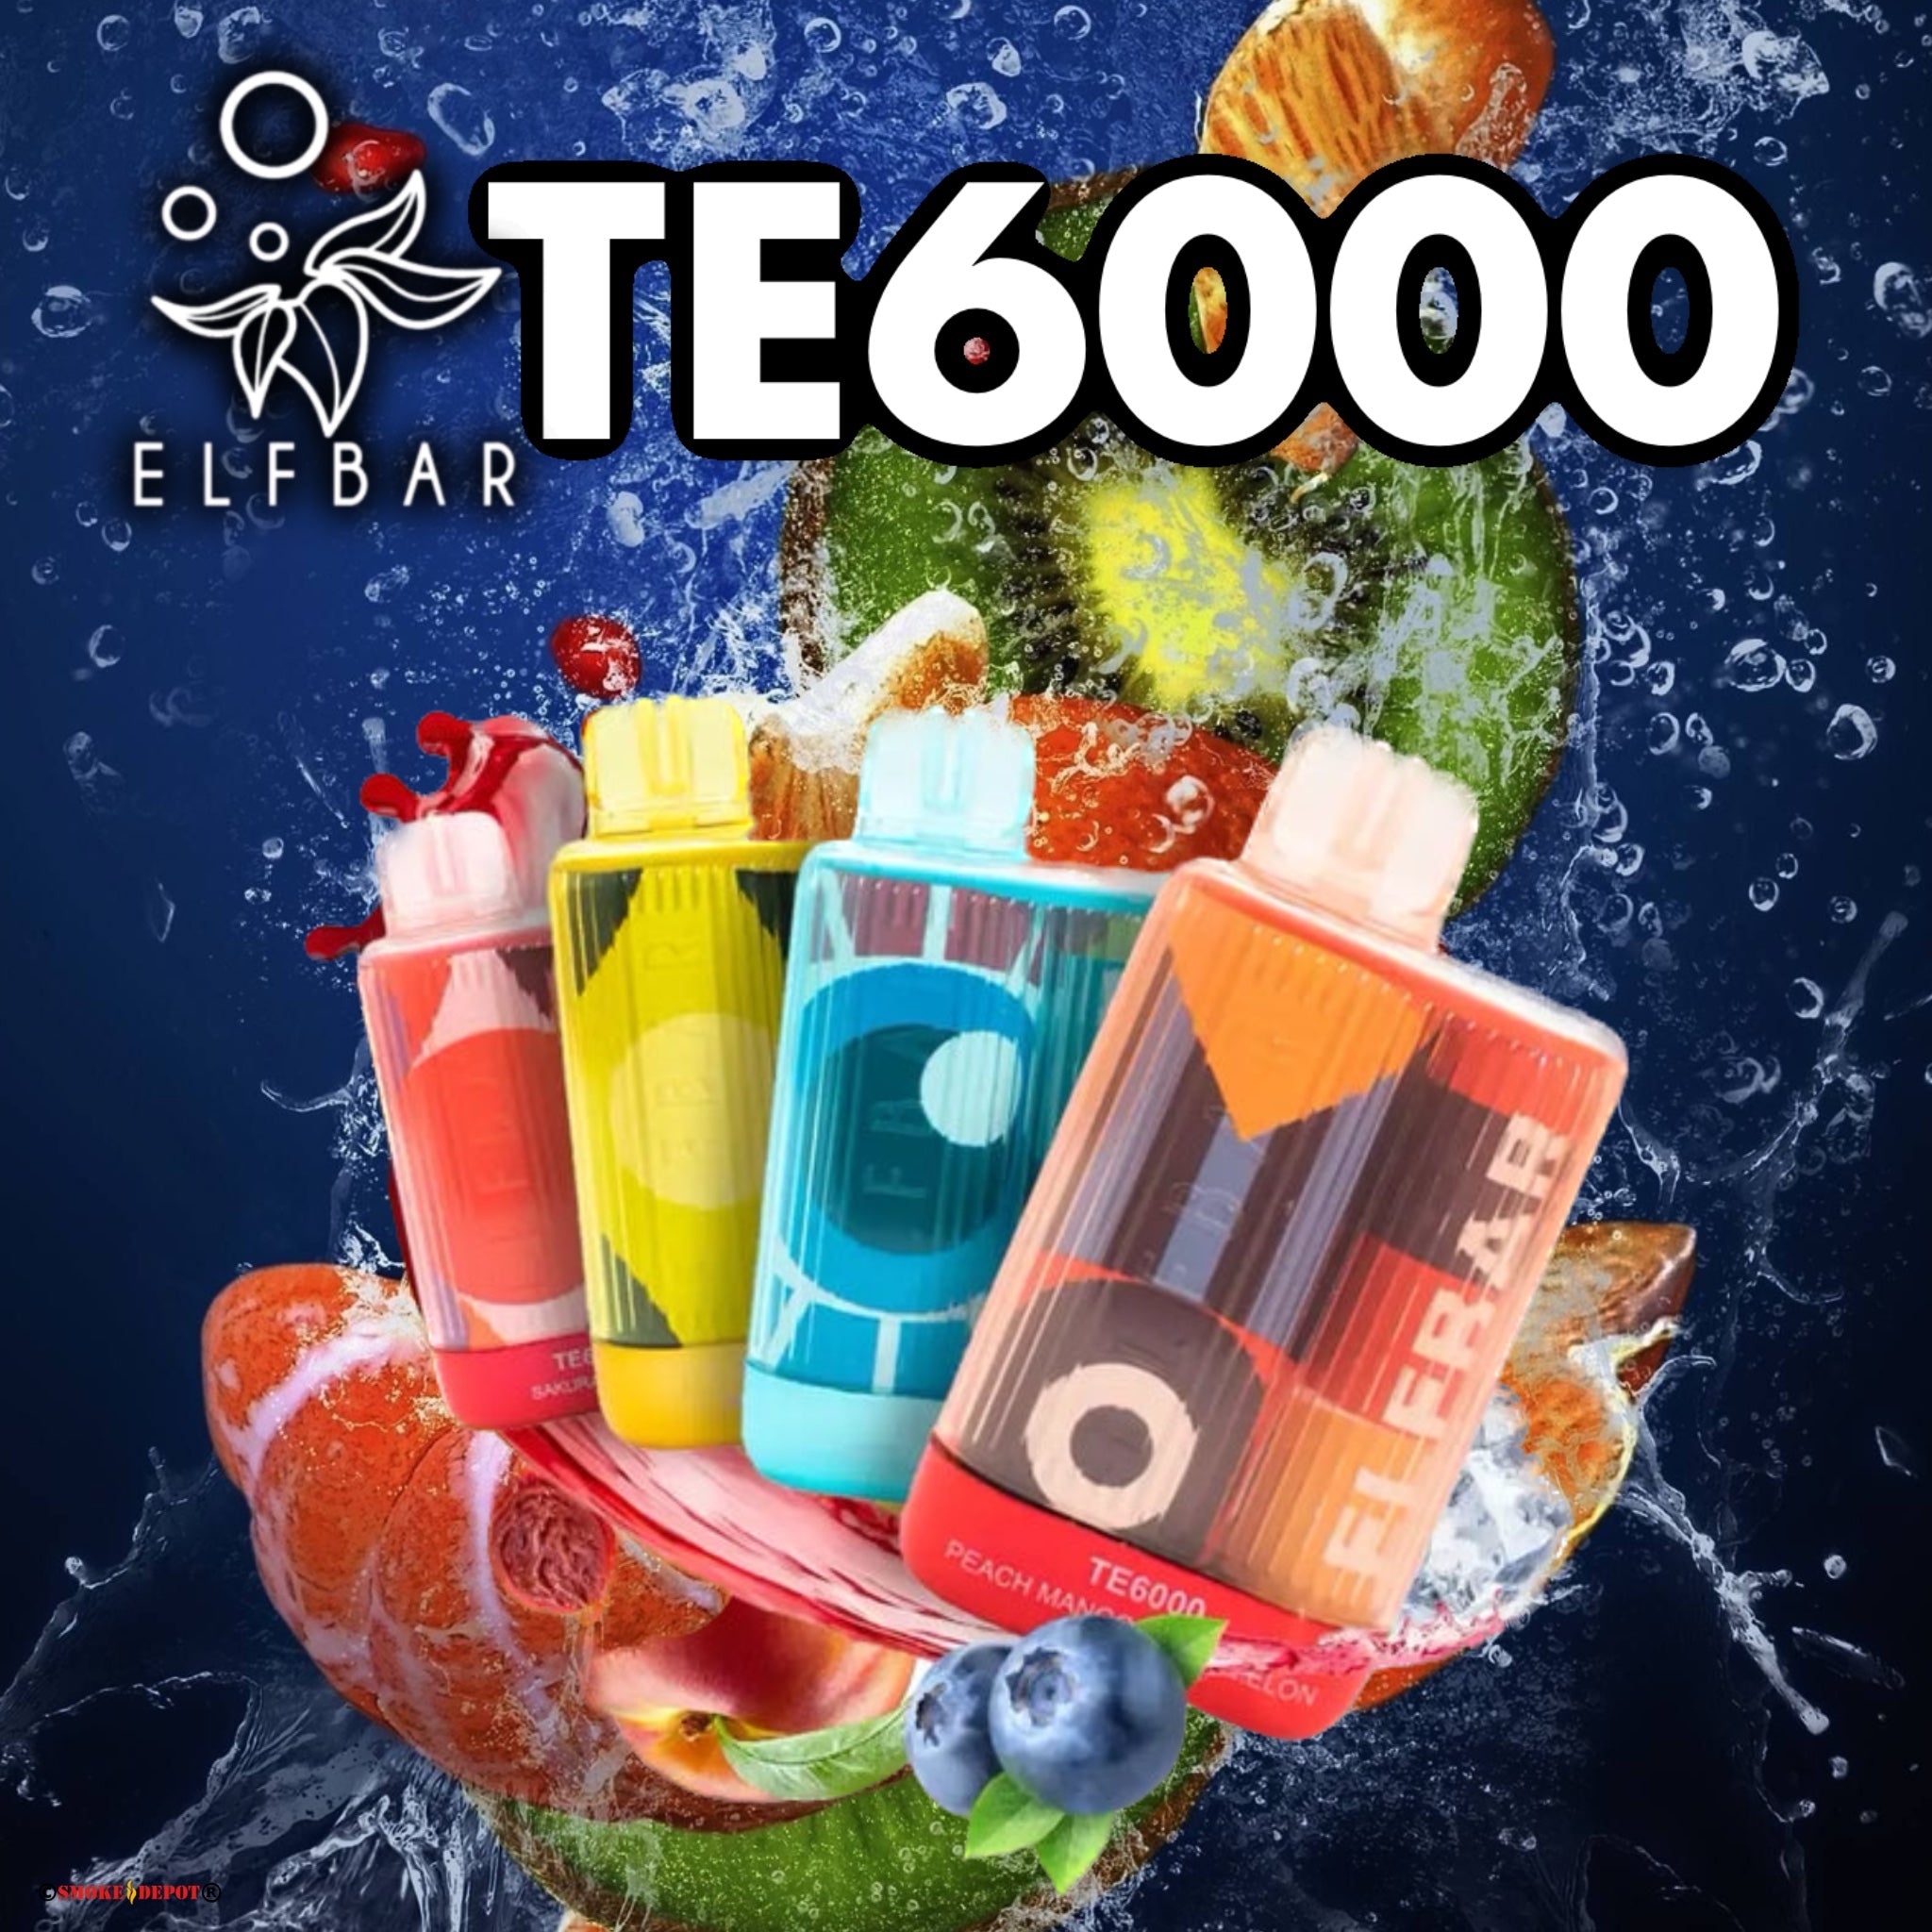 ELF BAR TE6000 Rechargeable Disposable [6000]